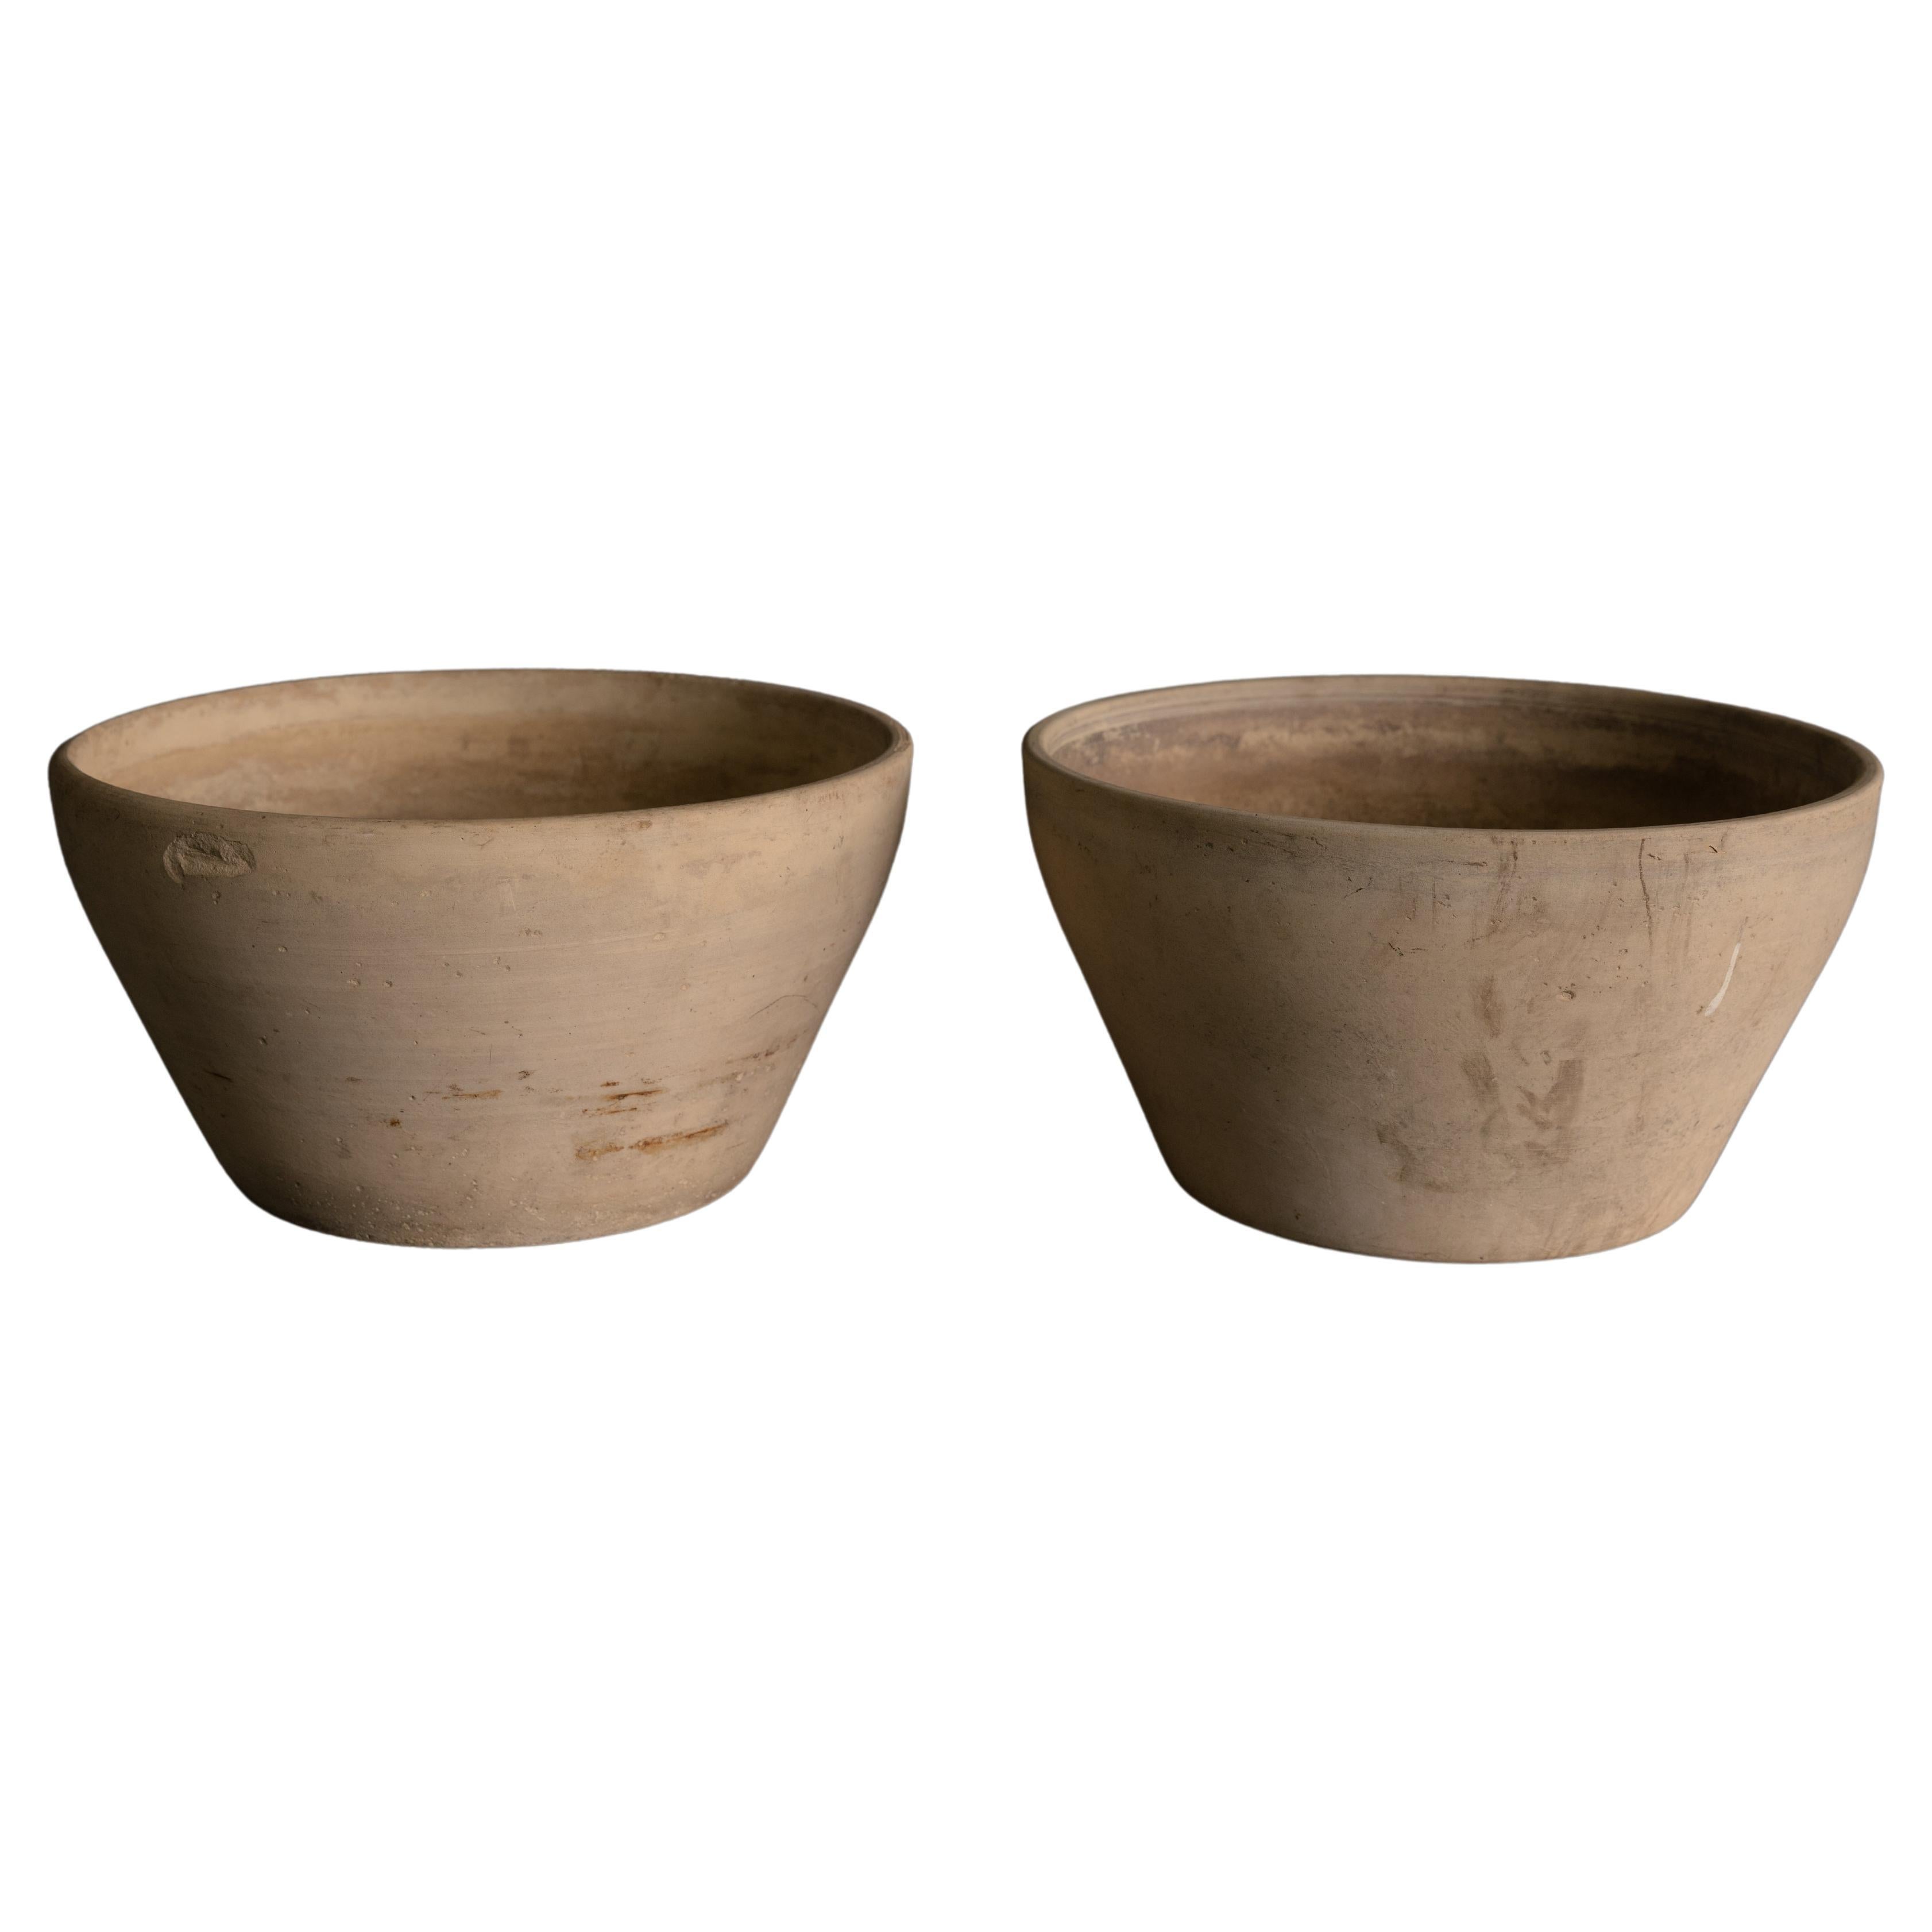 Bowl Planters in Bisque by Lagardo Tackett for Architectural Pottery